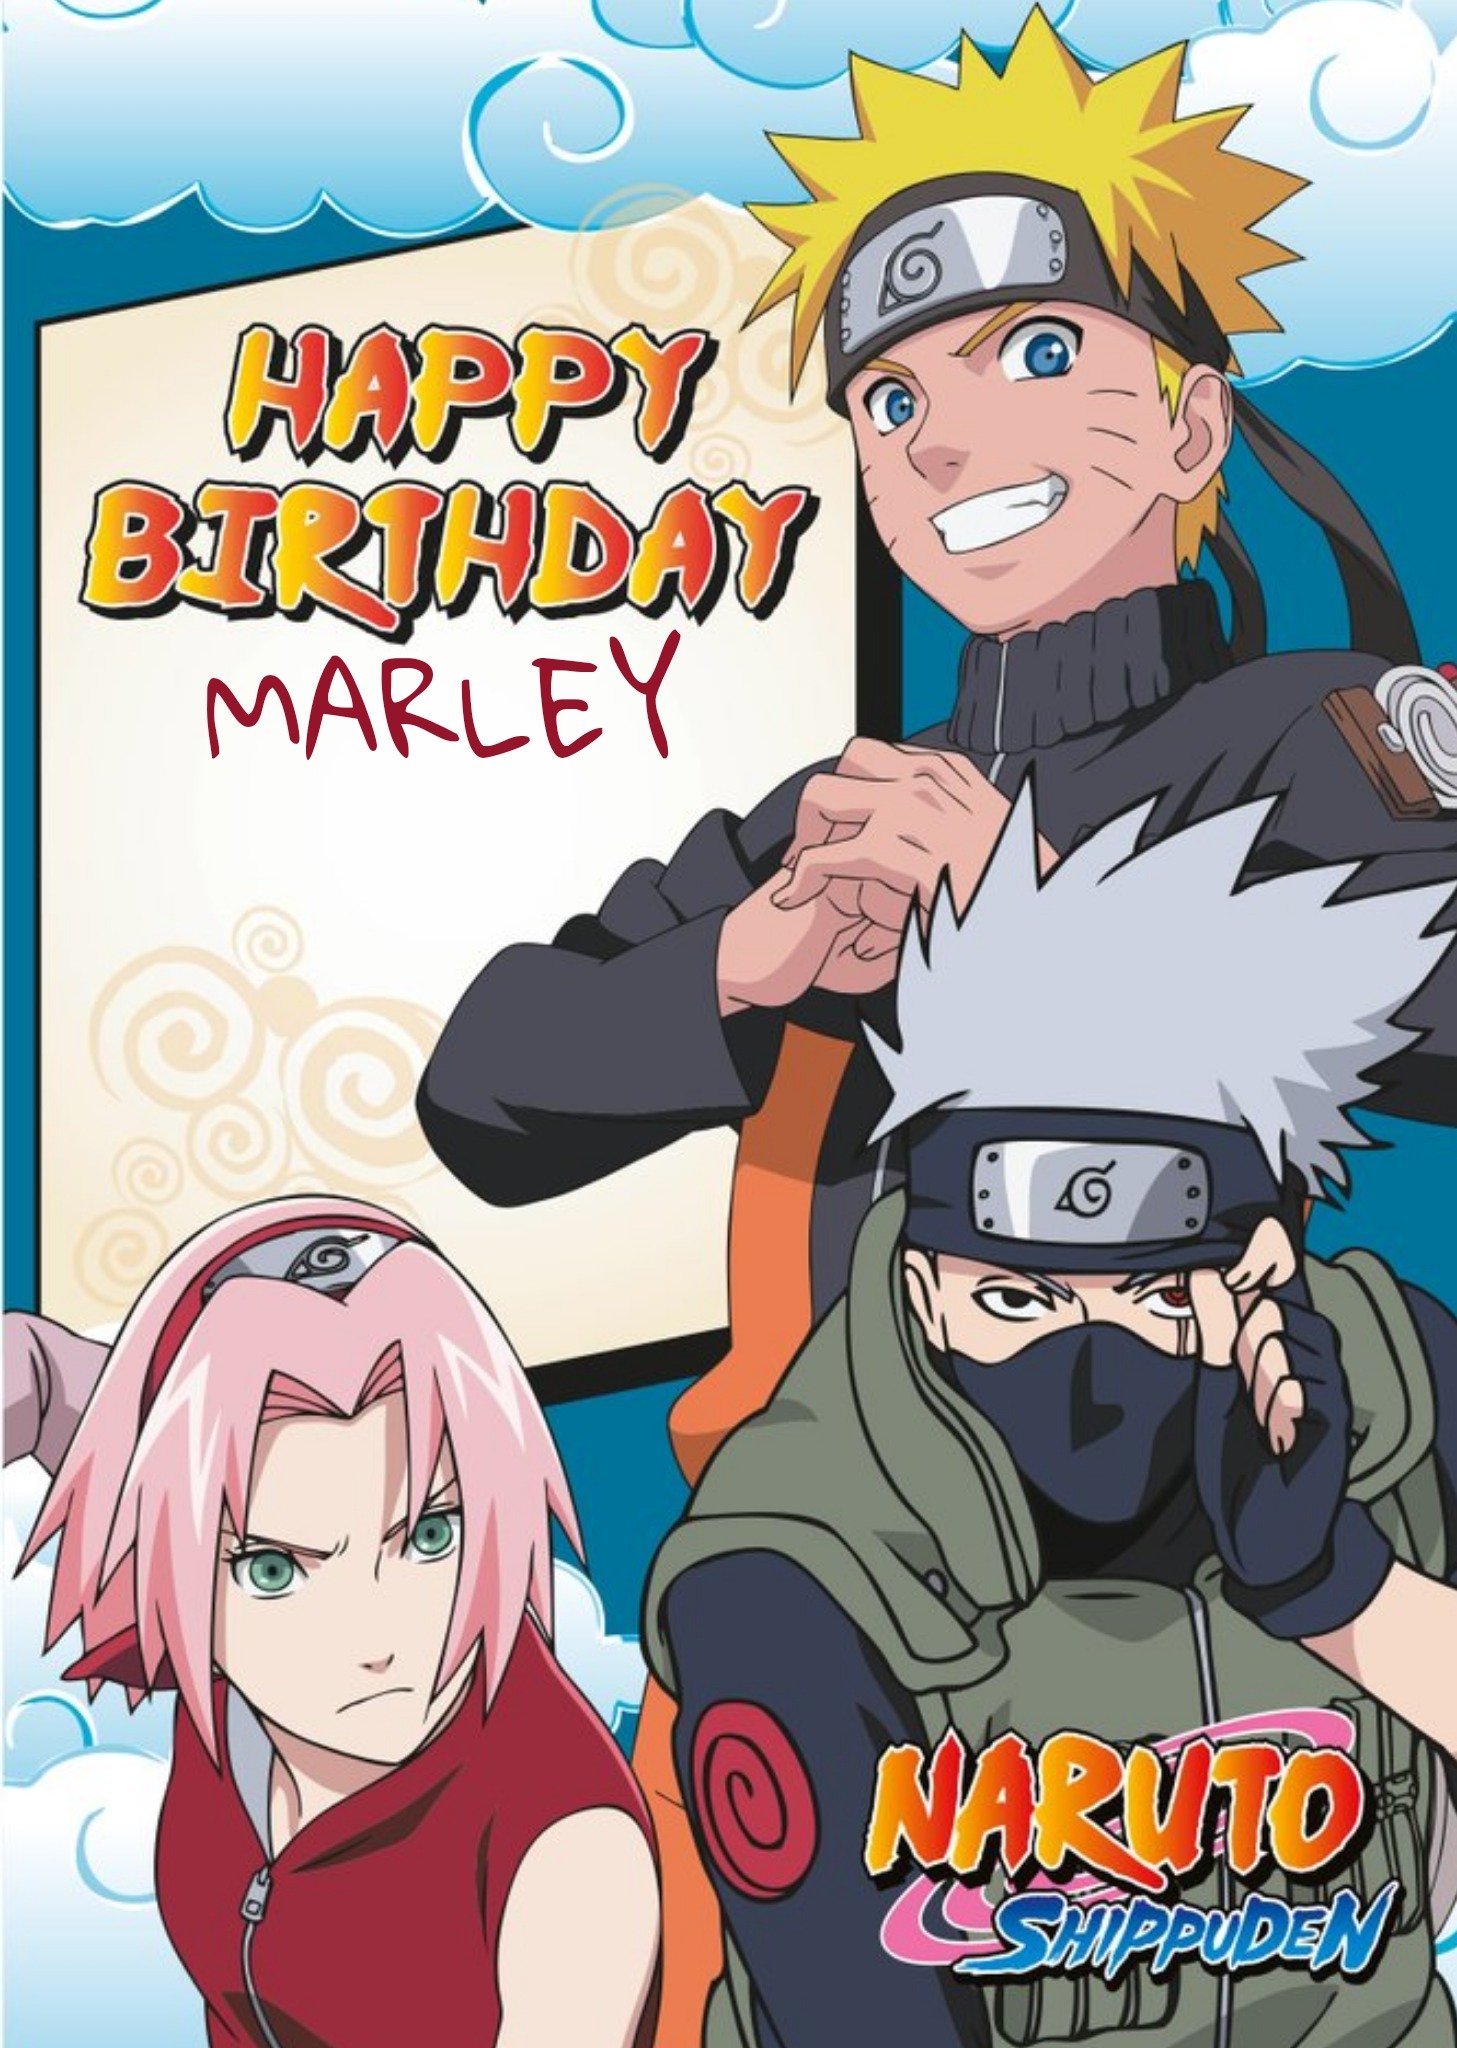 Moonpig Naruto Clouds And Characters Personalise Name Birthday Card, Large